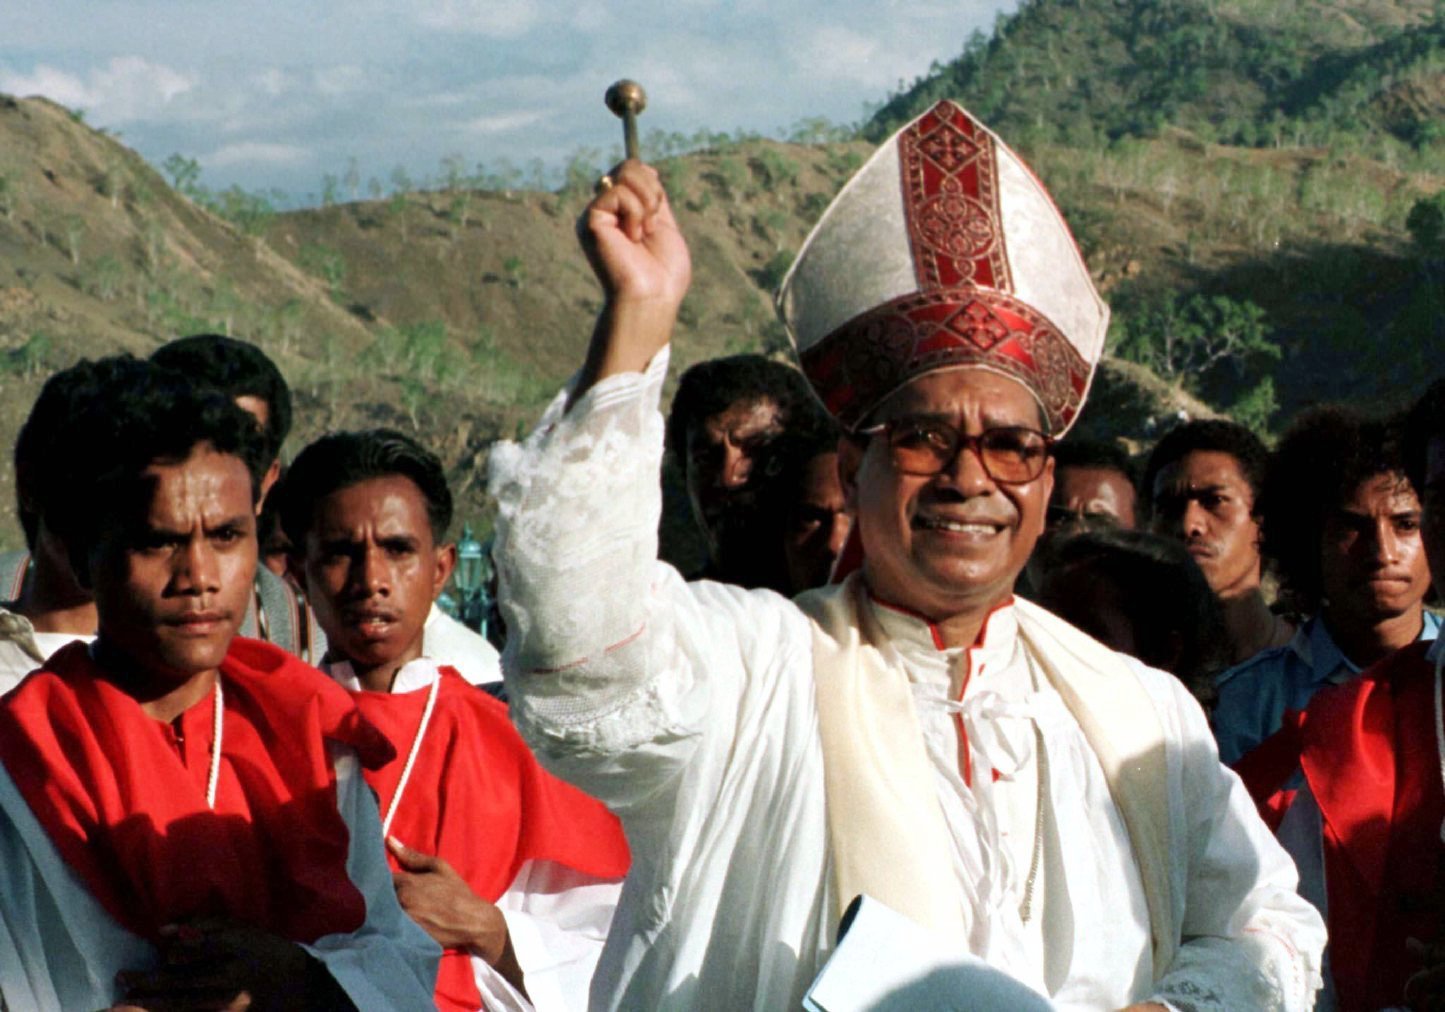 East Timorese Bishop Carlos Filipe Ximenes Belo sprinkles holy water during an outdoor Mass in Dili in this file photo. The bishop, now retired, has been accused of sexual abuse of minors. (CNS/Reuters)